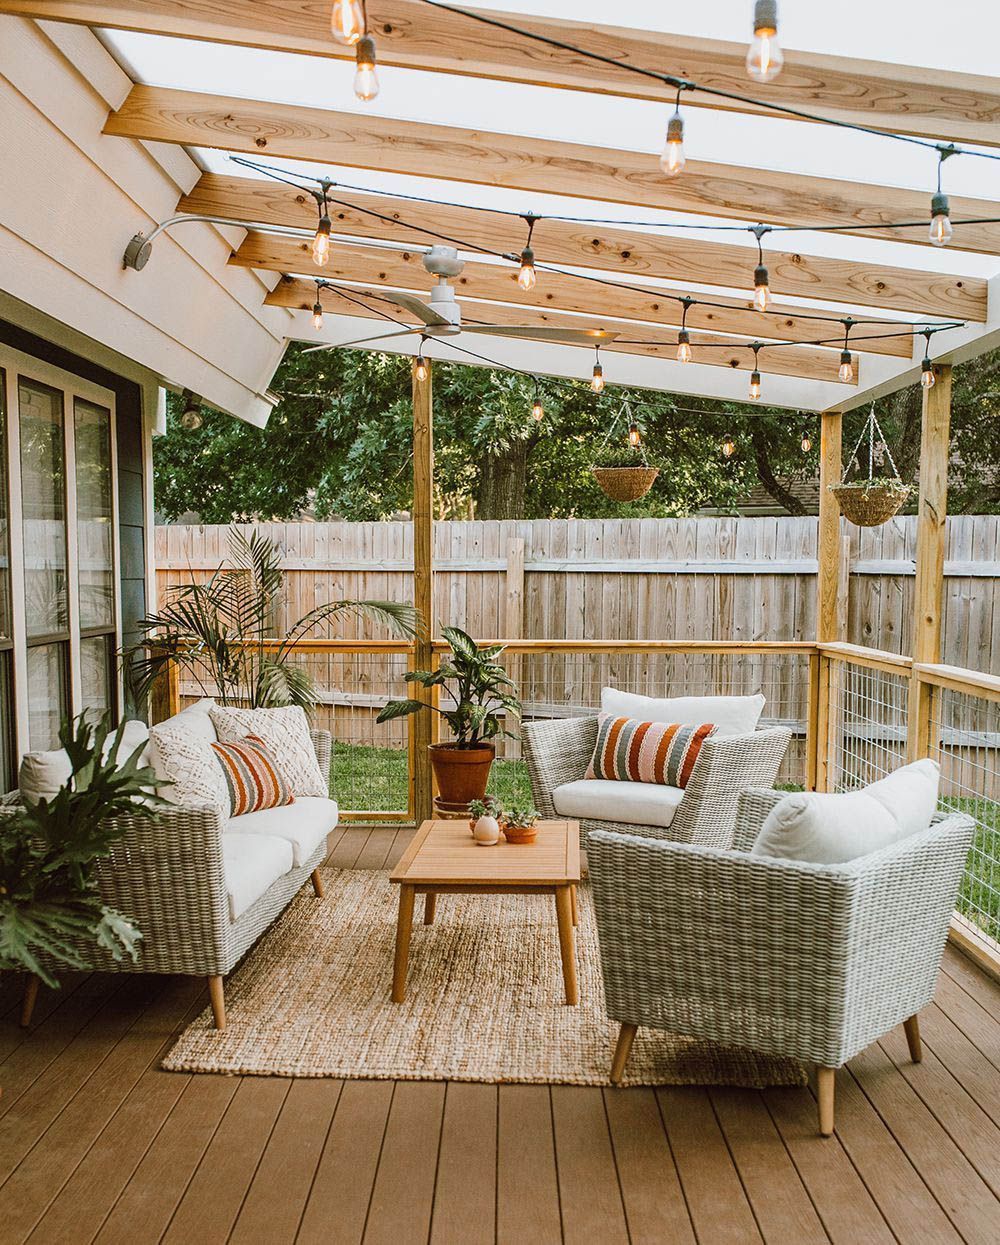 26+ Patio Ideas to Beautify Your Home On a Budget